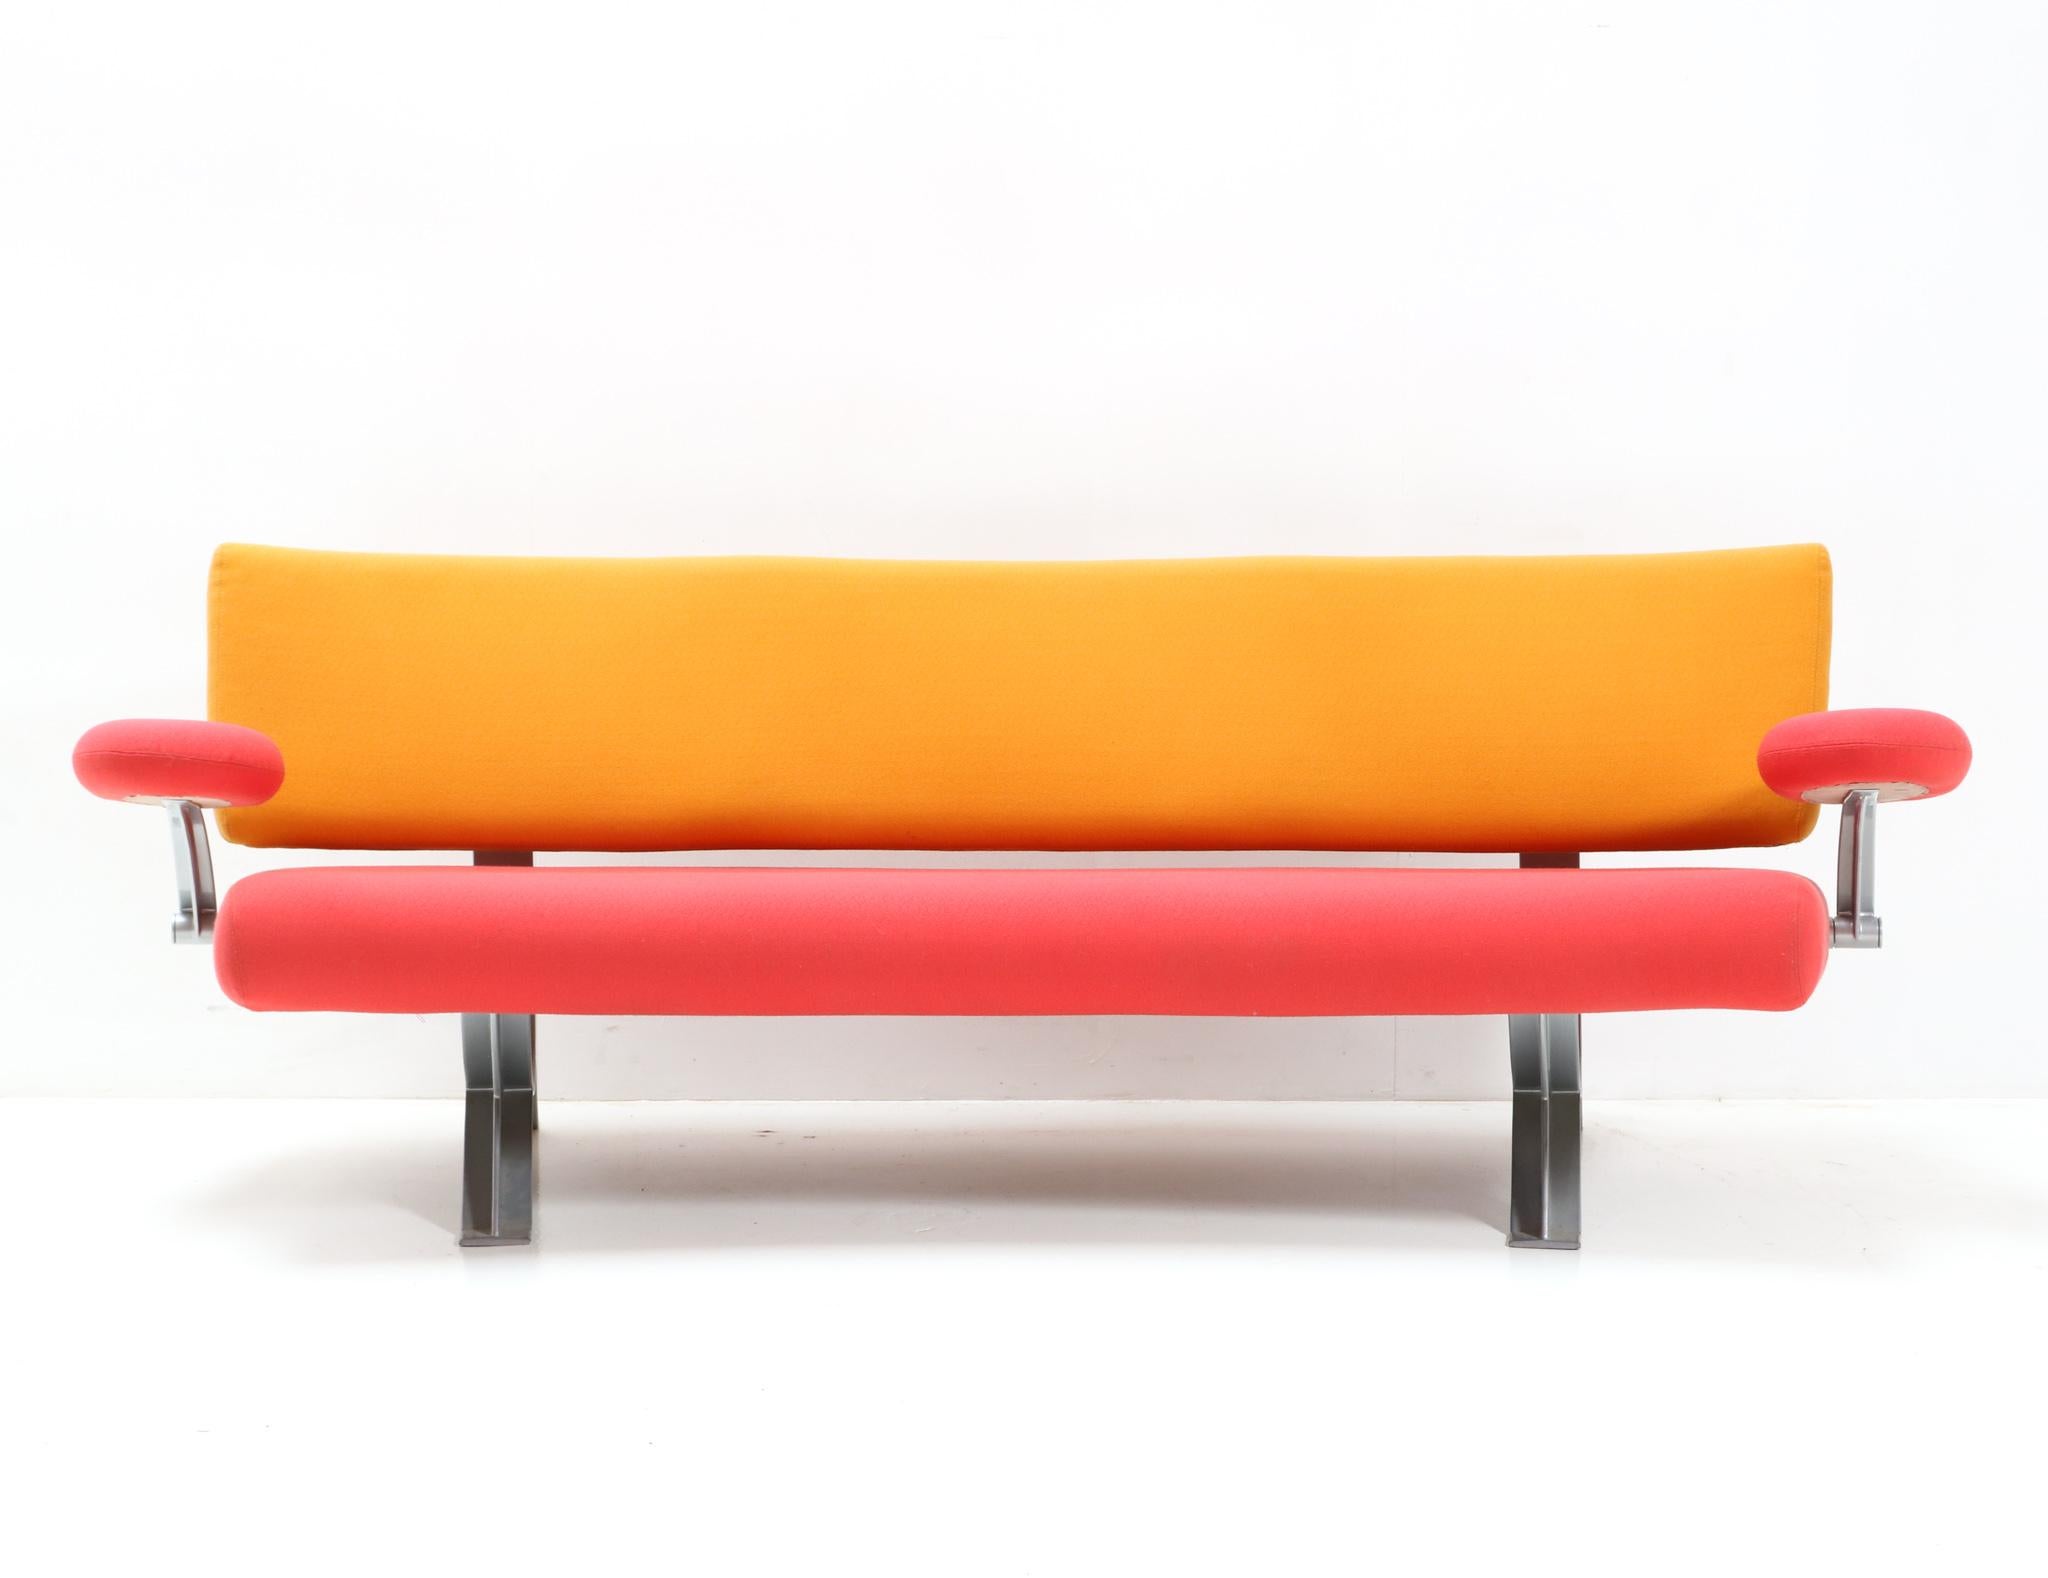 Stunning vintage sofa or bench.
Design by Wolfgang C.R. Mezger for Artifort.
Striking Dutch design from the 1990s.
Model Orbit C341/3
Original silver/grey lacquered aluminum frame with original two-tone upholstery in yellow and pink fabric.
Weight